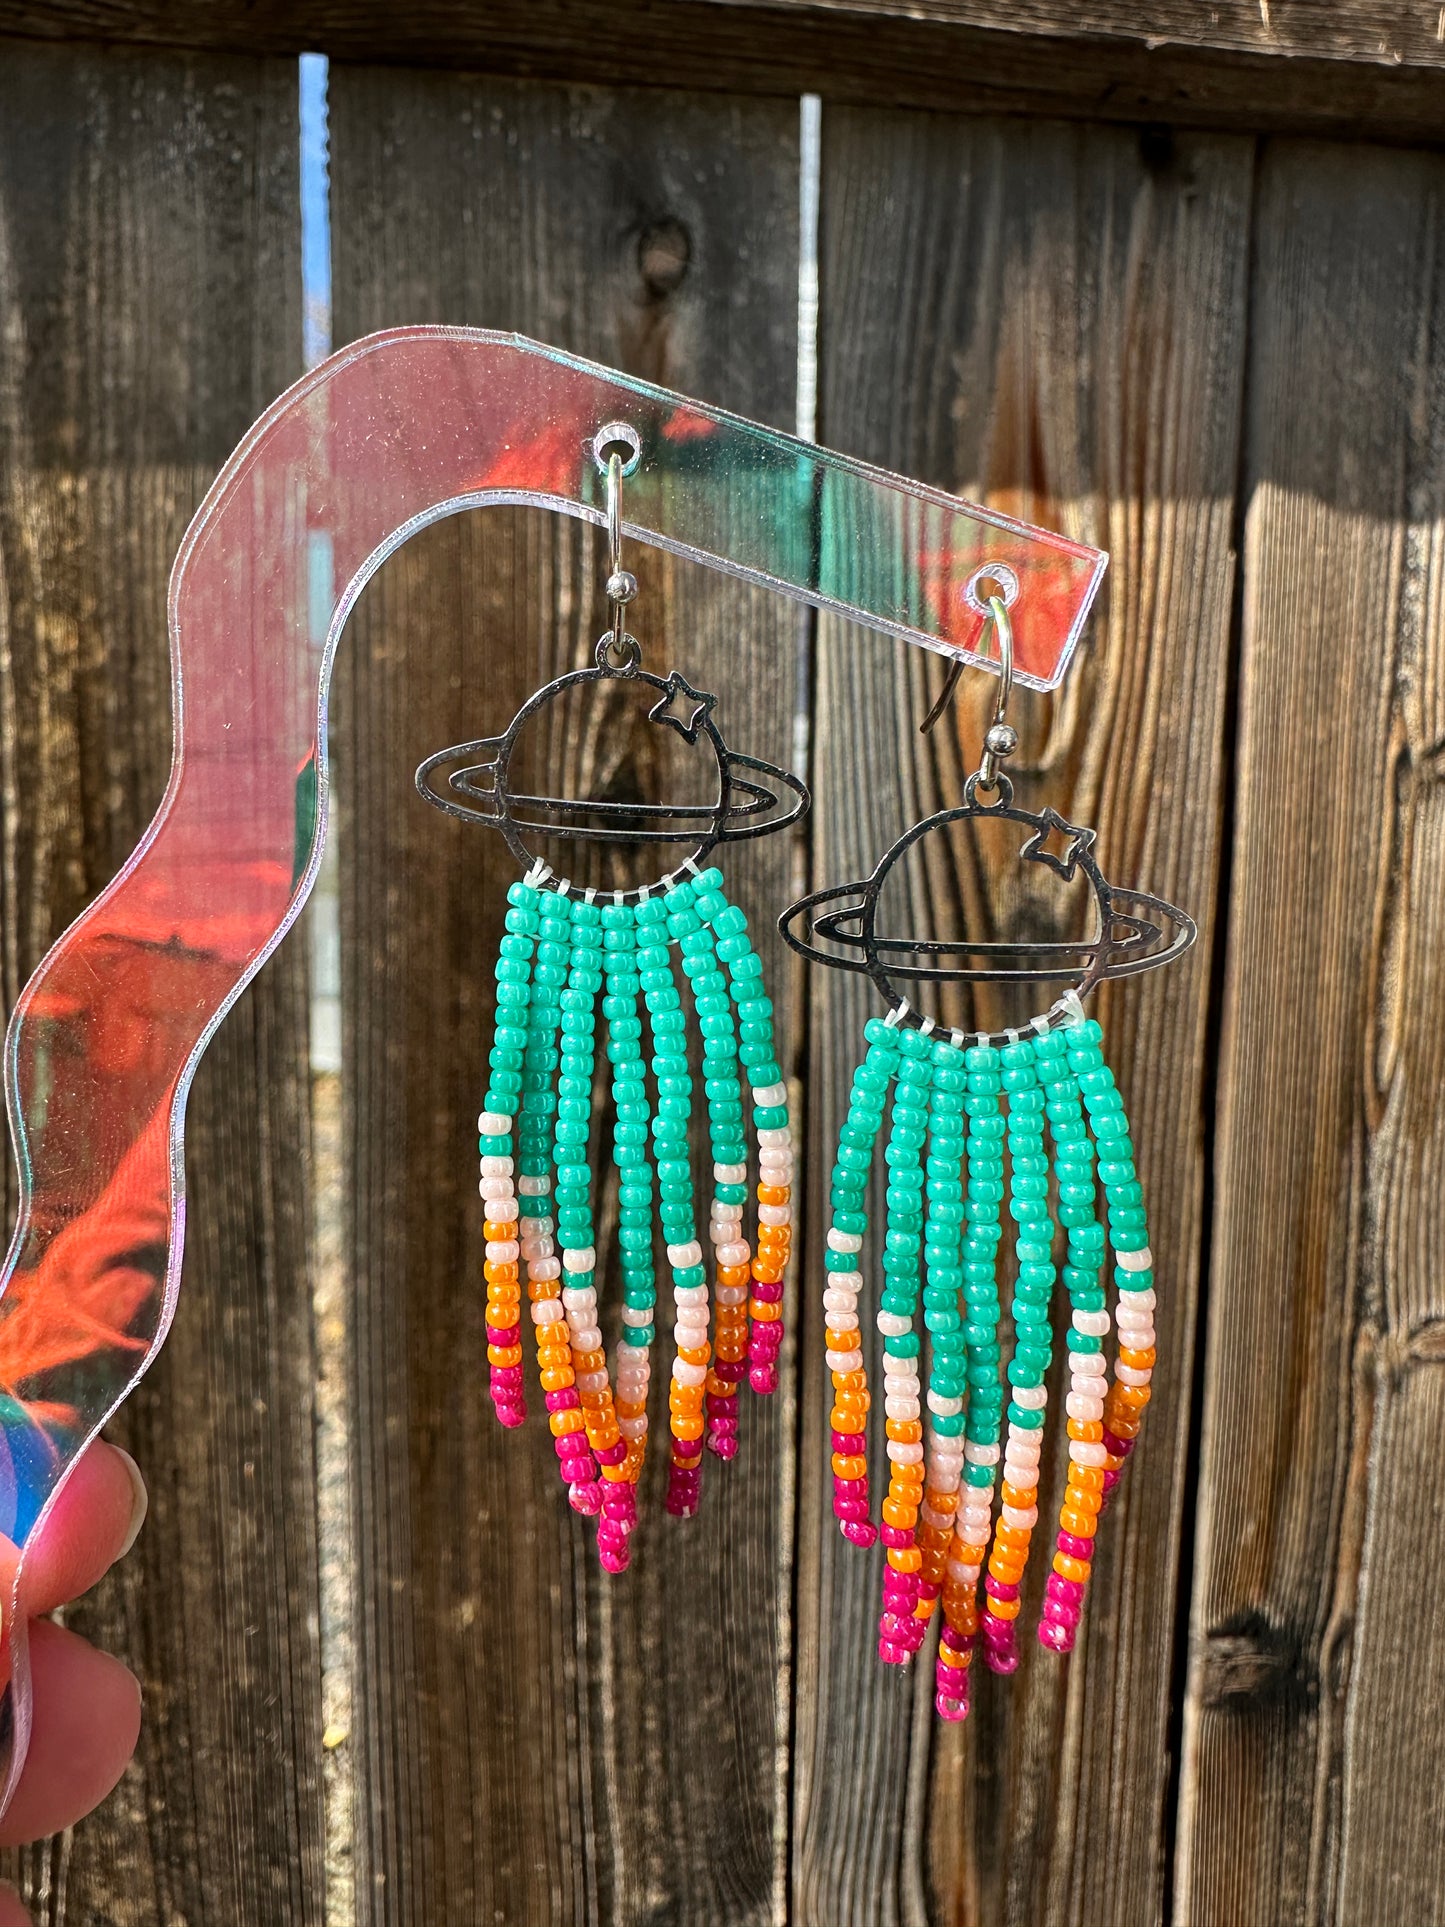 Cosmic Teal Burst Beaded Earrings  These hand beaded fringe earrings are an enchanting addition to your jewelry box  Meticulously crafted  Individually strung  High quality Japanese seed beads   Fitted with stainless steel french ear wires  Suitable for most sensitive ears  2.5" long x 1" wide